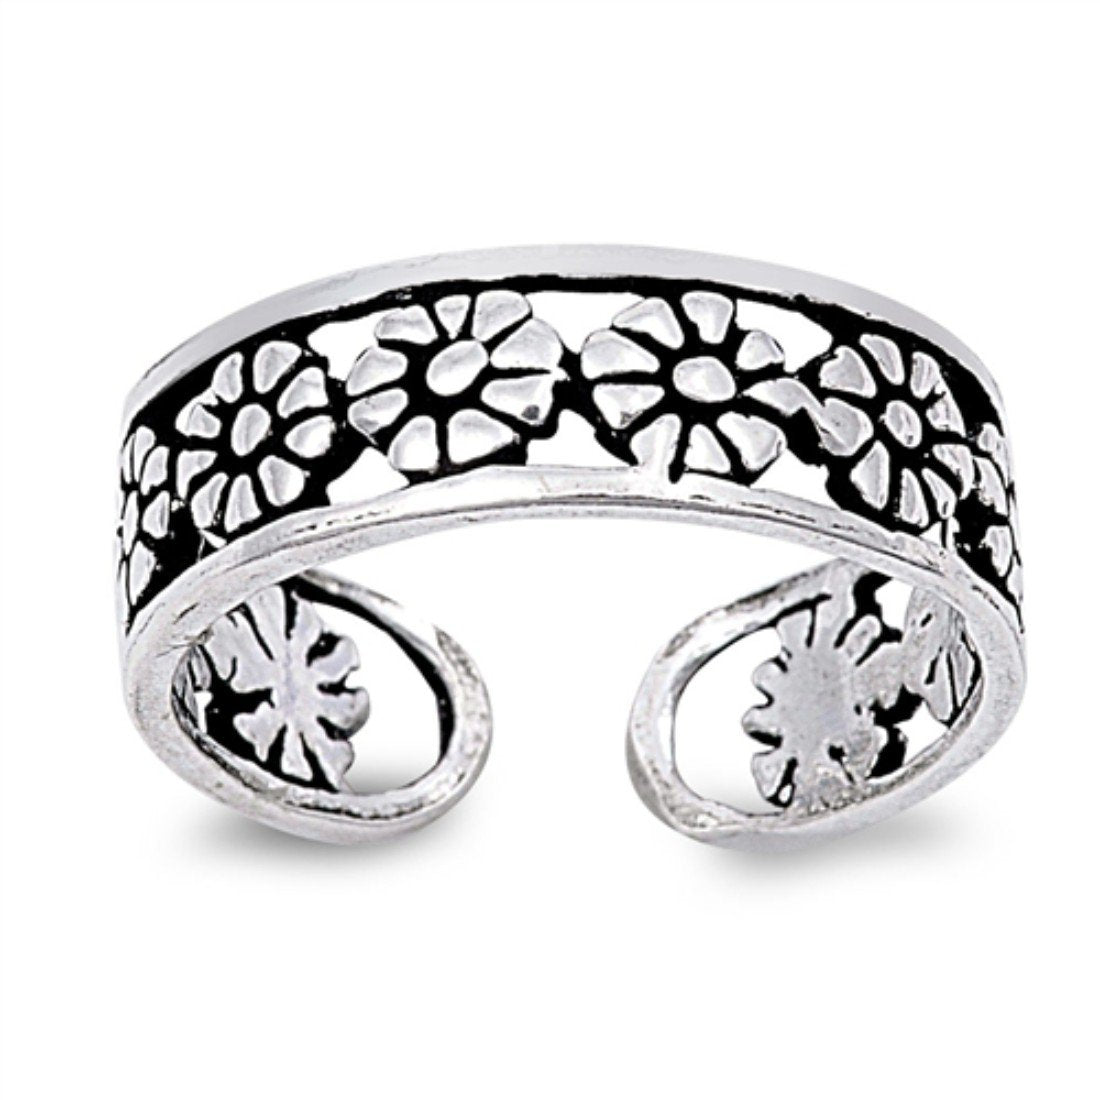 Flower Silver Toe Ring Adjustable Band 925 Sterling Silver For Women (5mm)